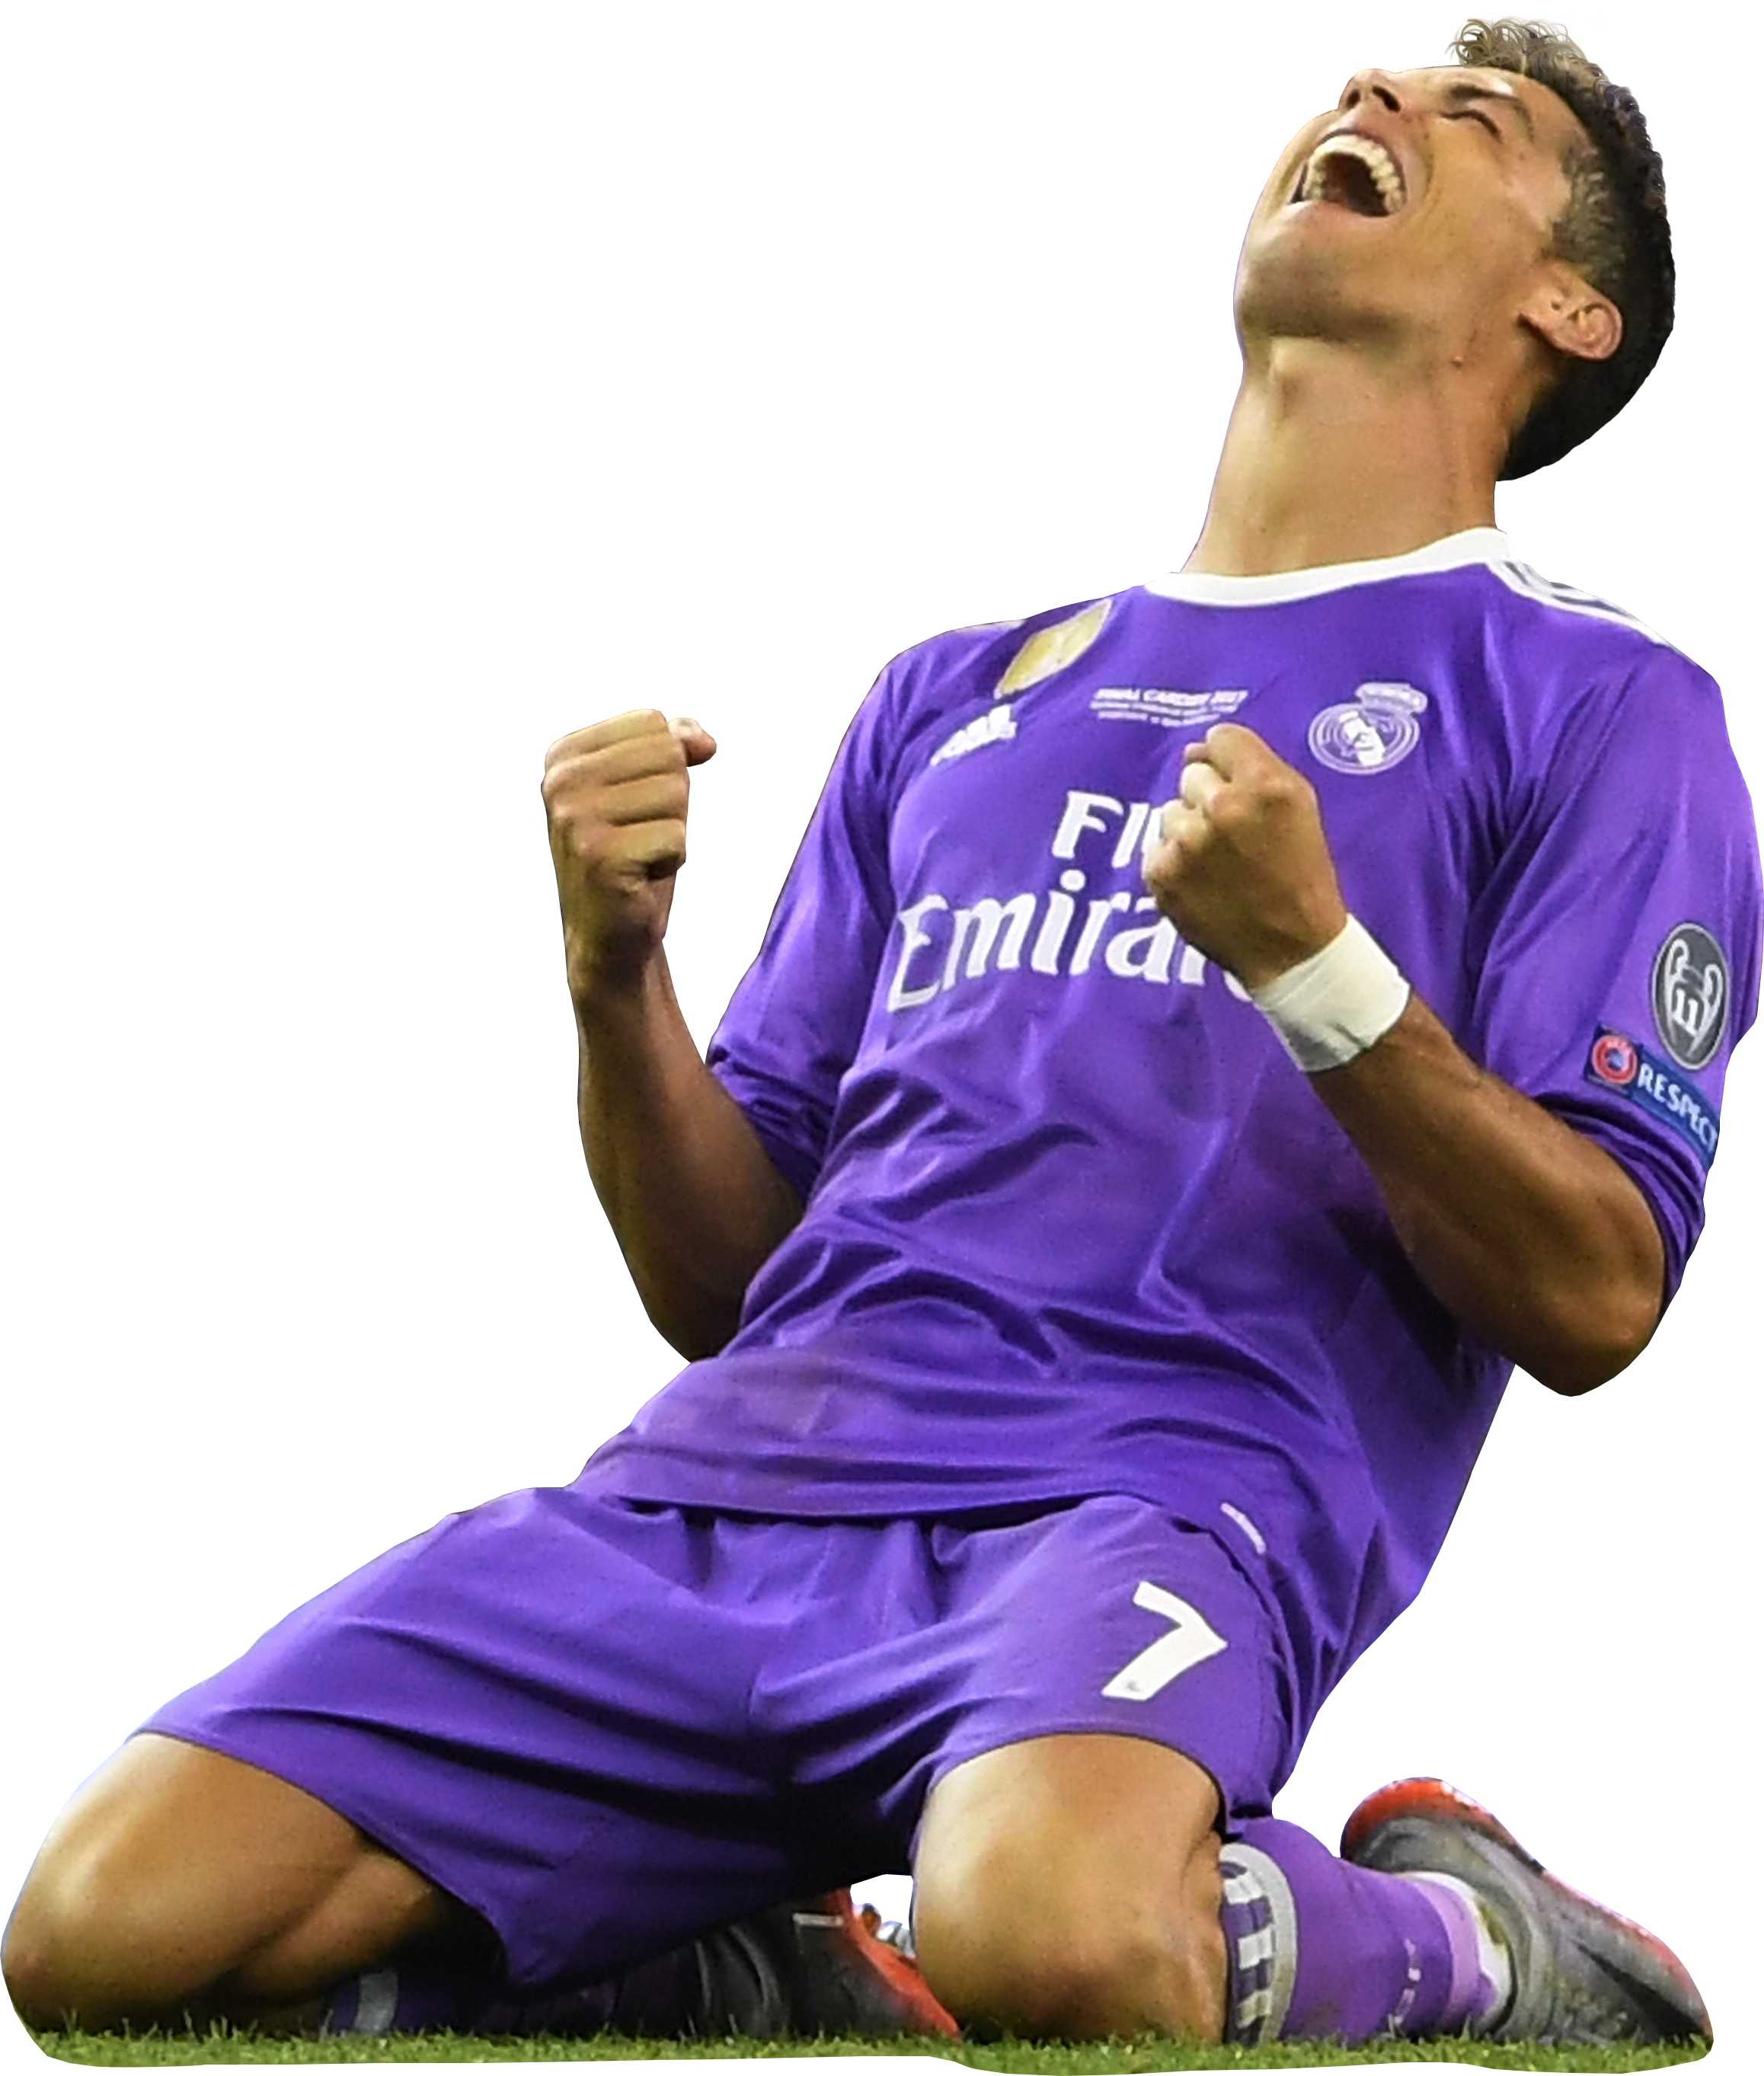 Cristiano Ronaldo Football Render 88721 Footyrenders | Images and ...